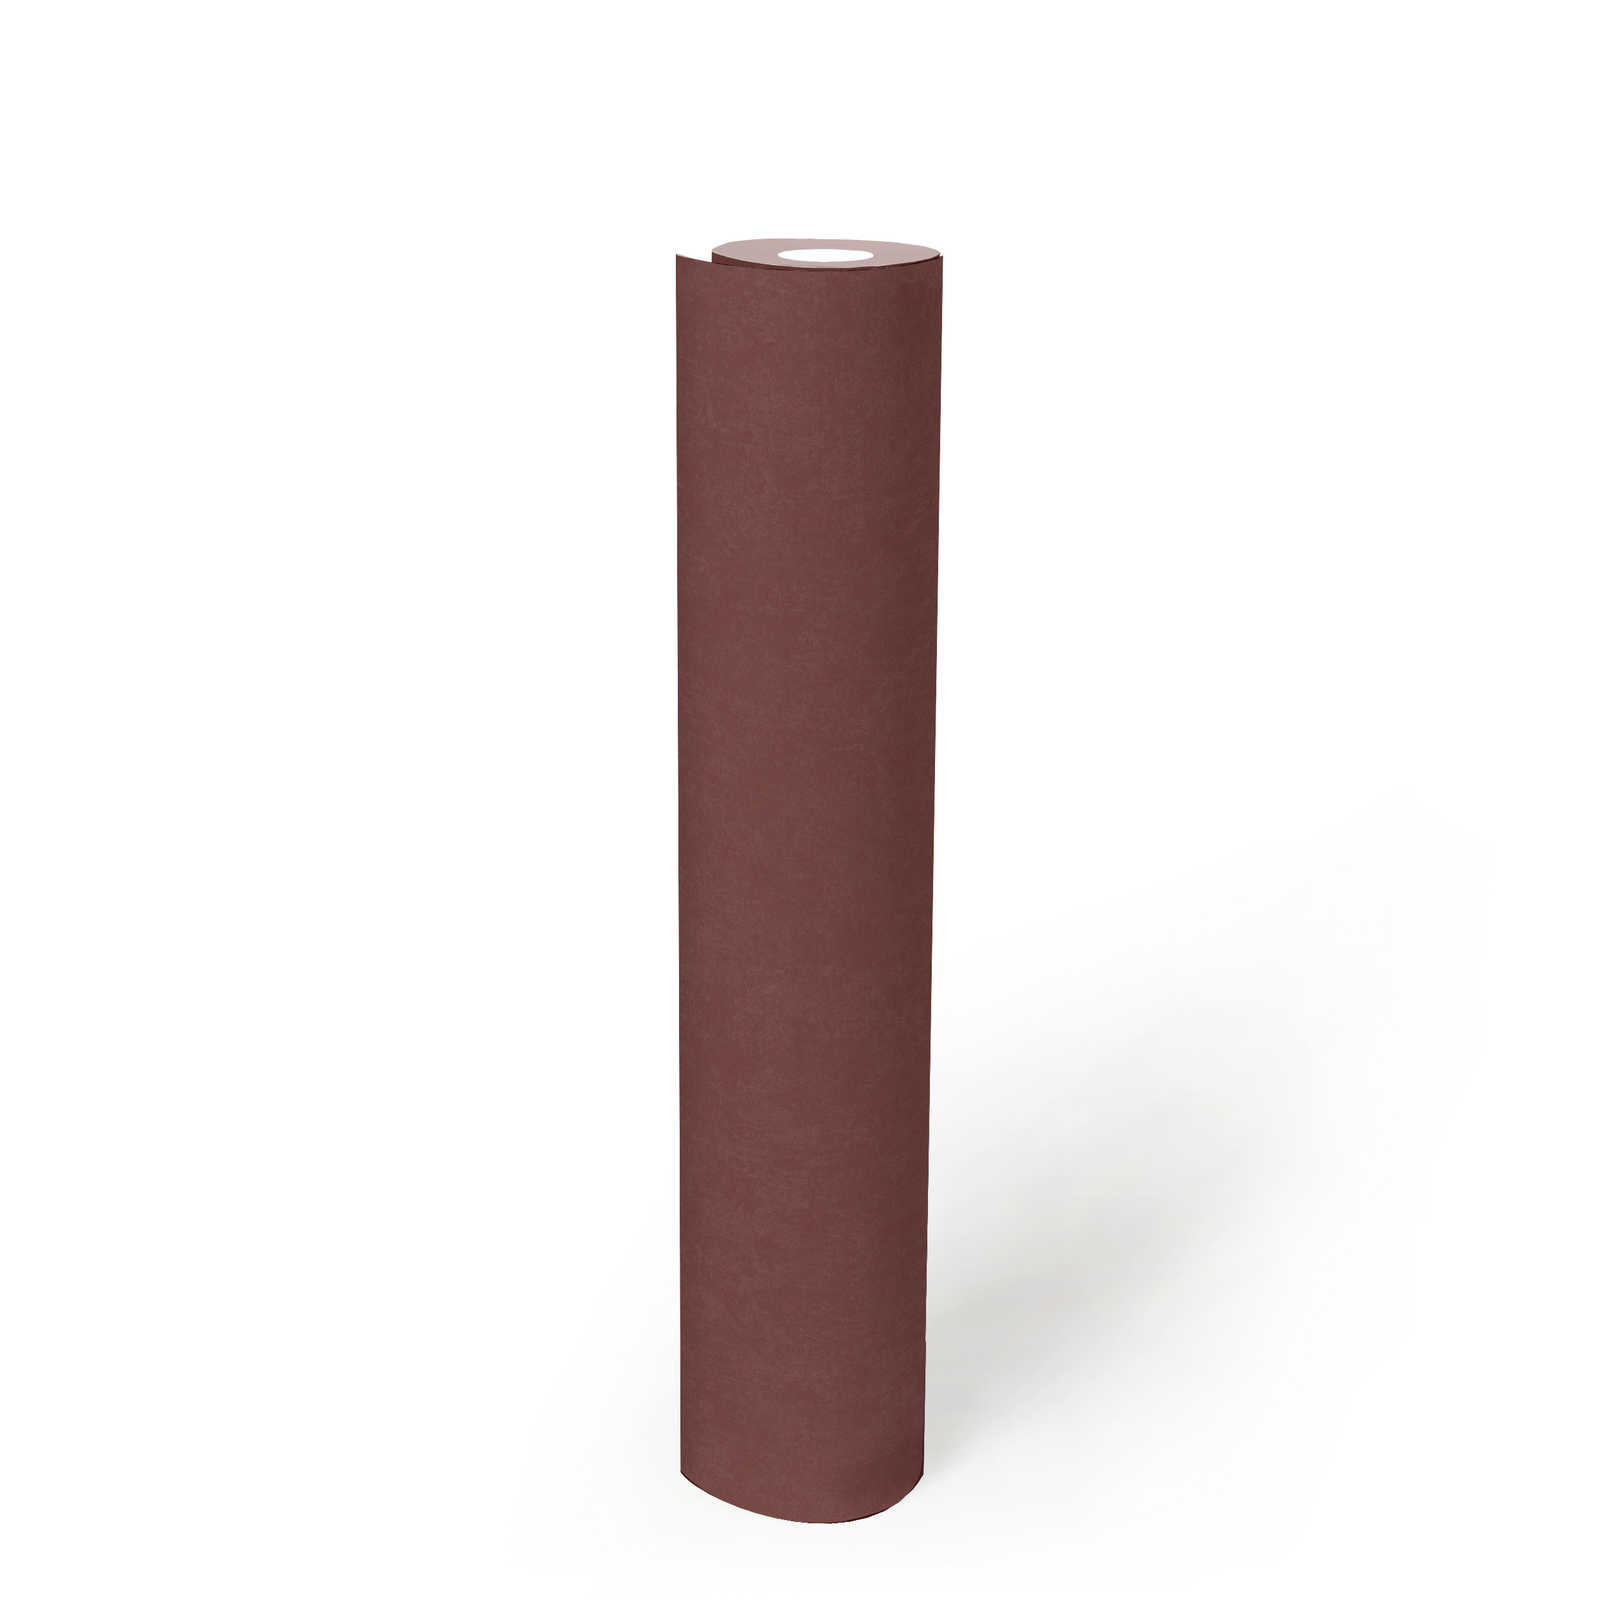             Wine red wallpaper plain with texture design - red
        